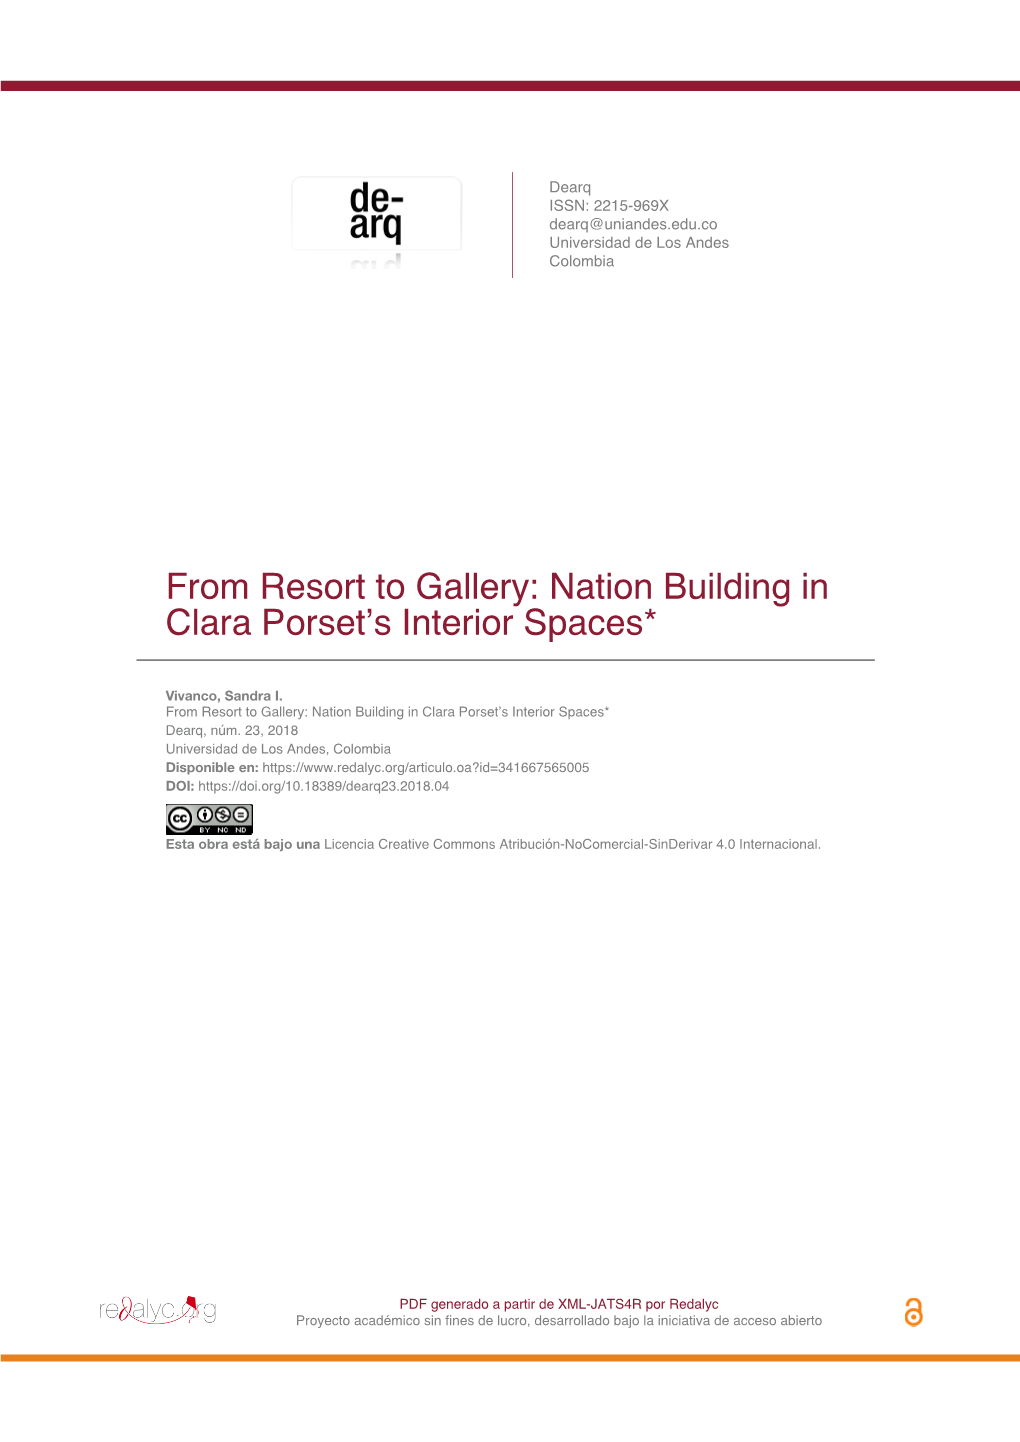 From Resort to Gallery: Nation Building in Clara Porset's